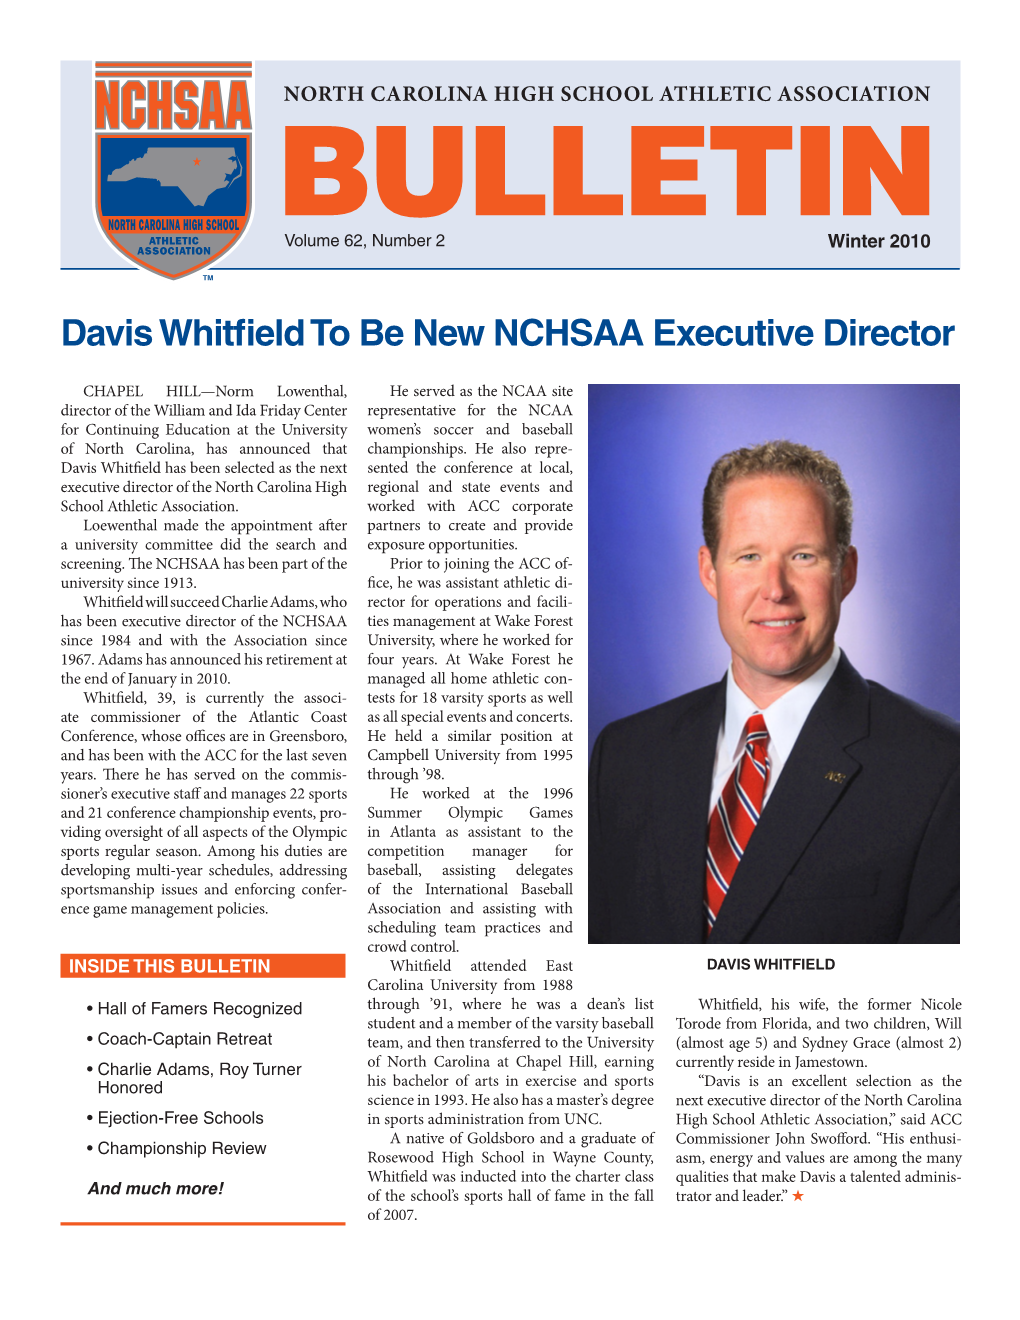 Davis Whitfield to Be New NCHSAA Executive Director